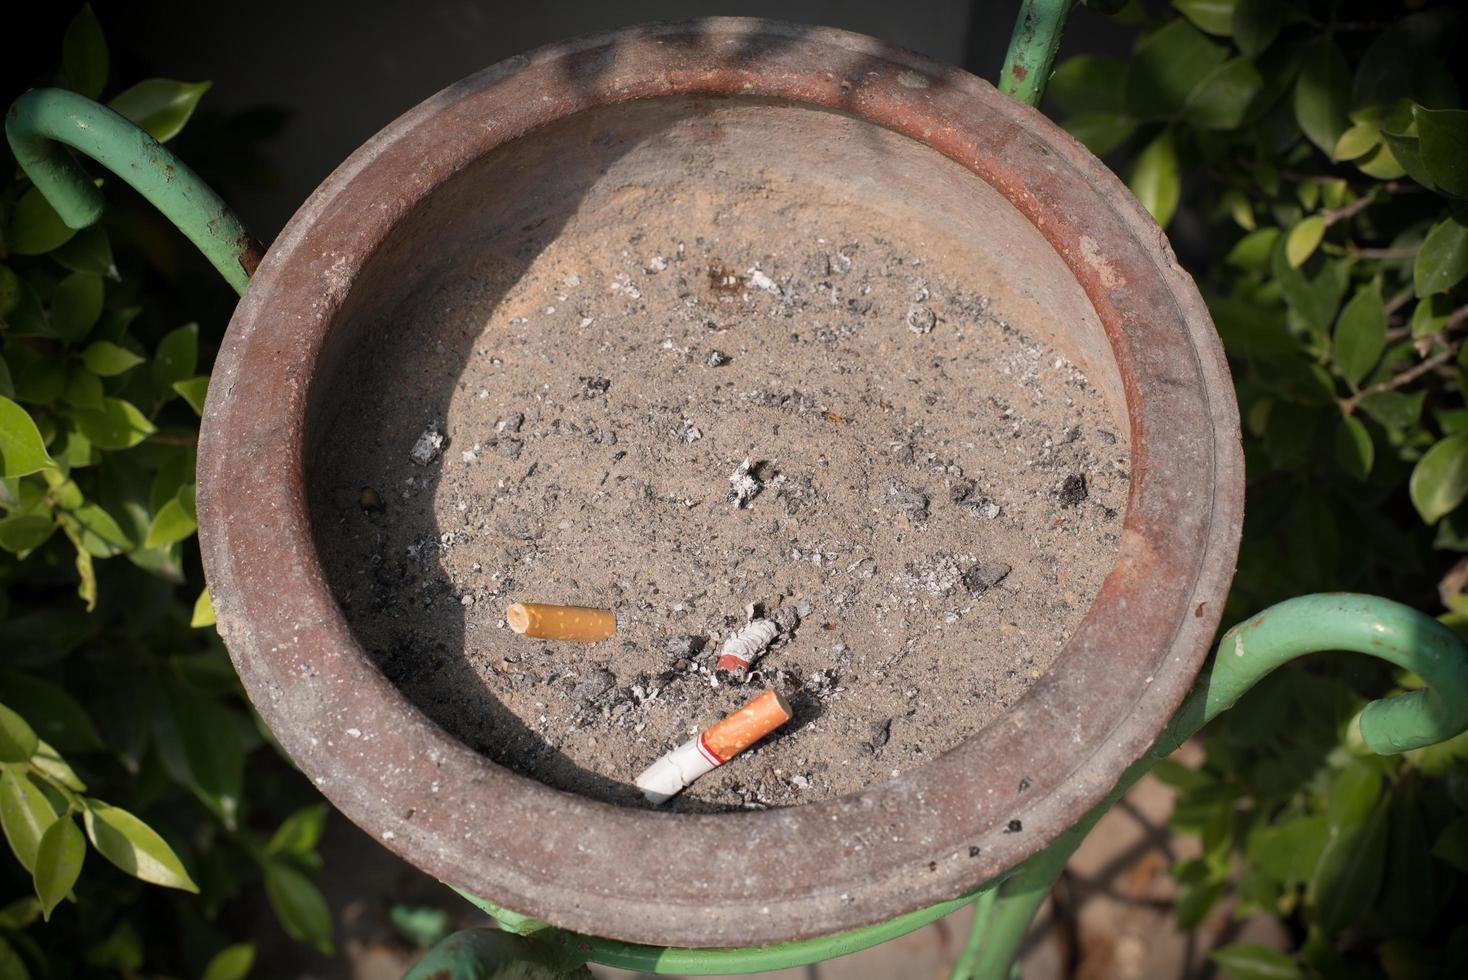 A place to throw cigarette butts. photo